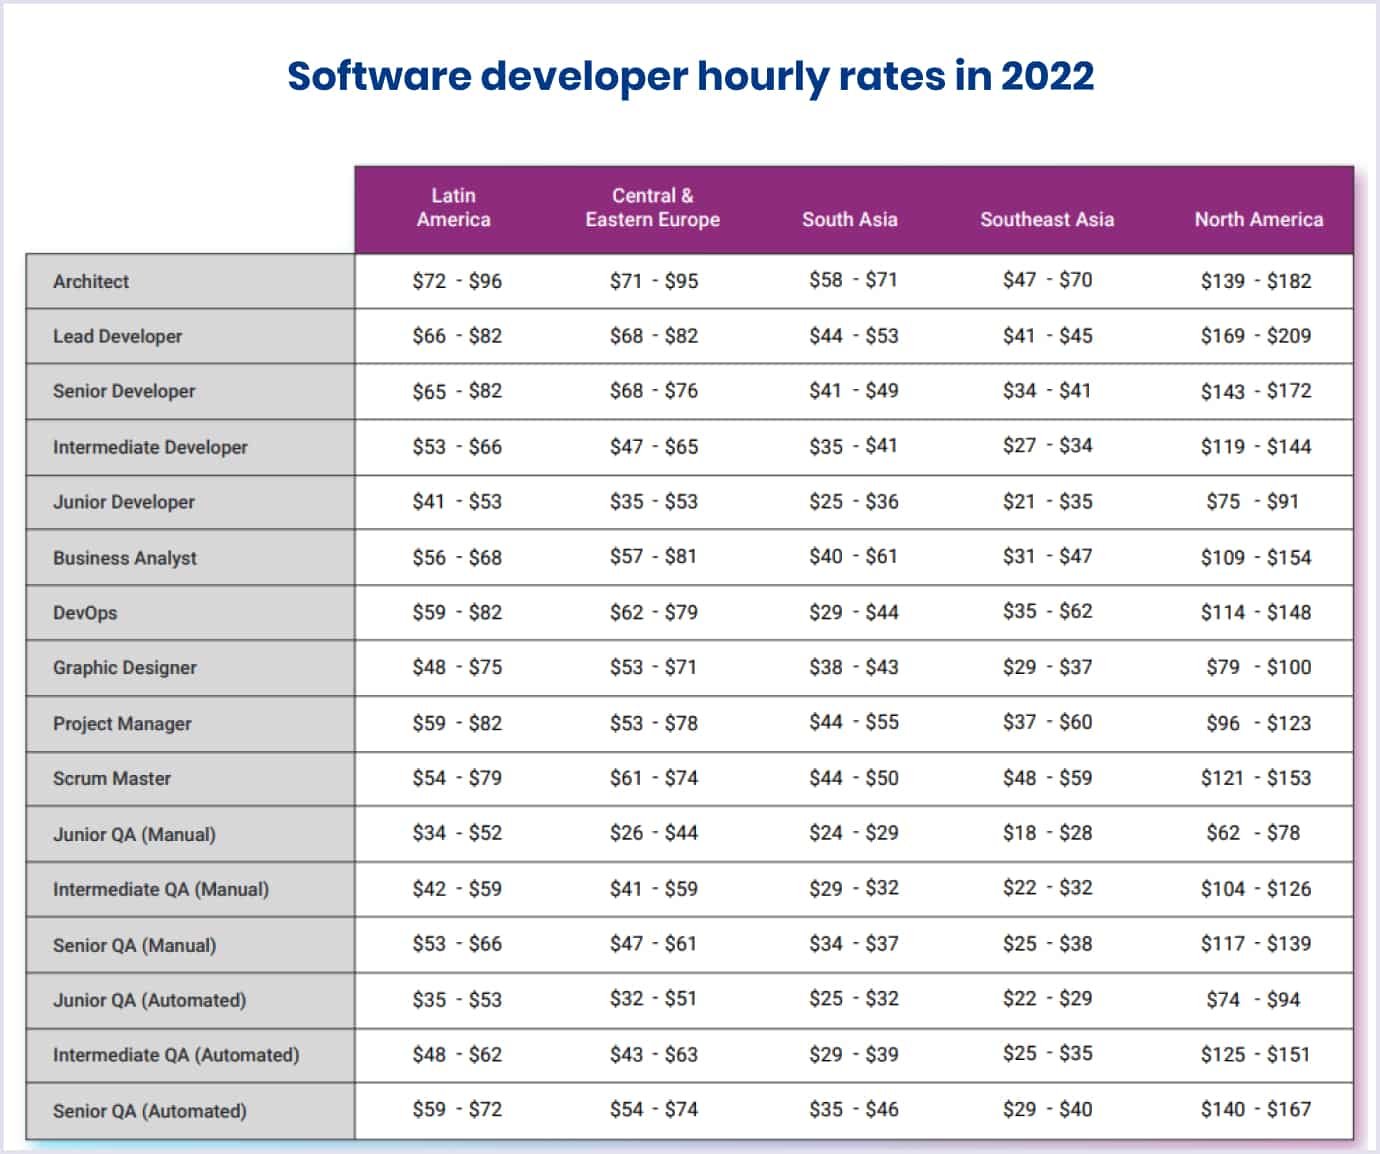 Accelerance software rate data for 2022